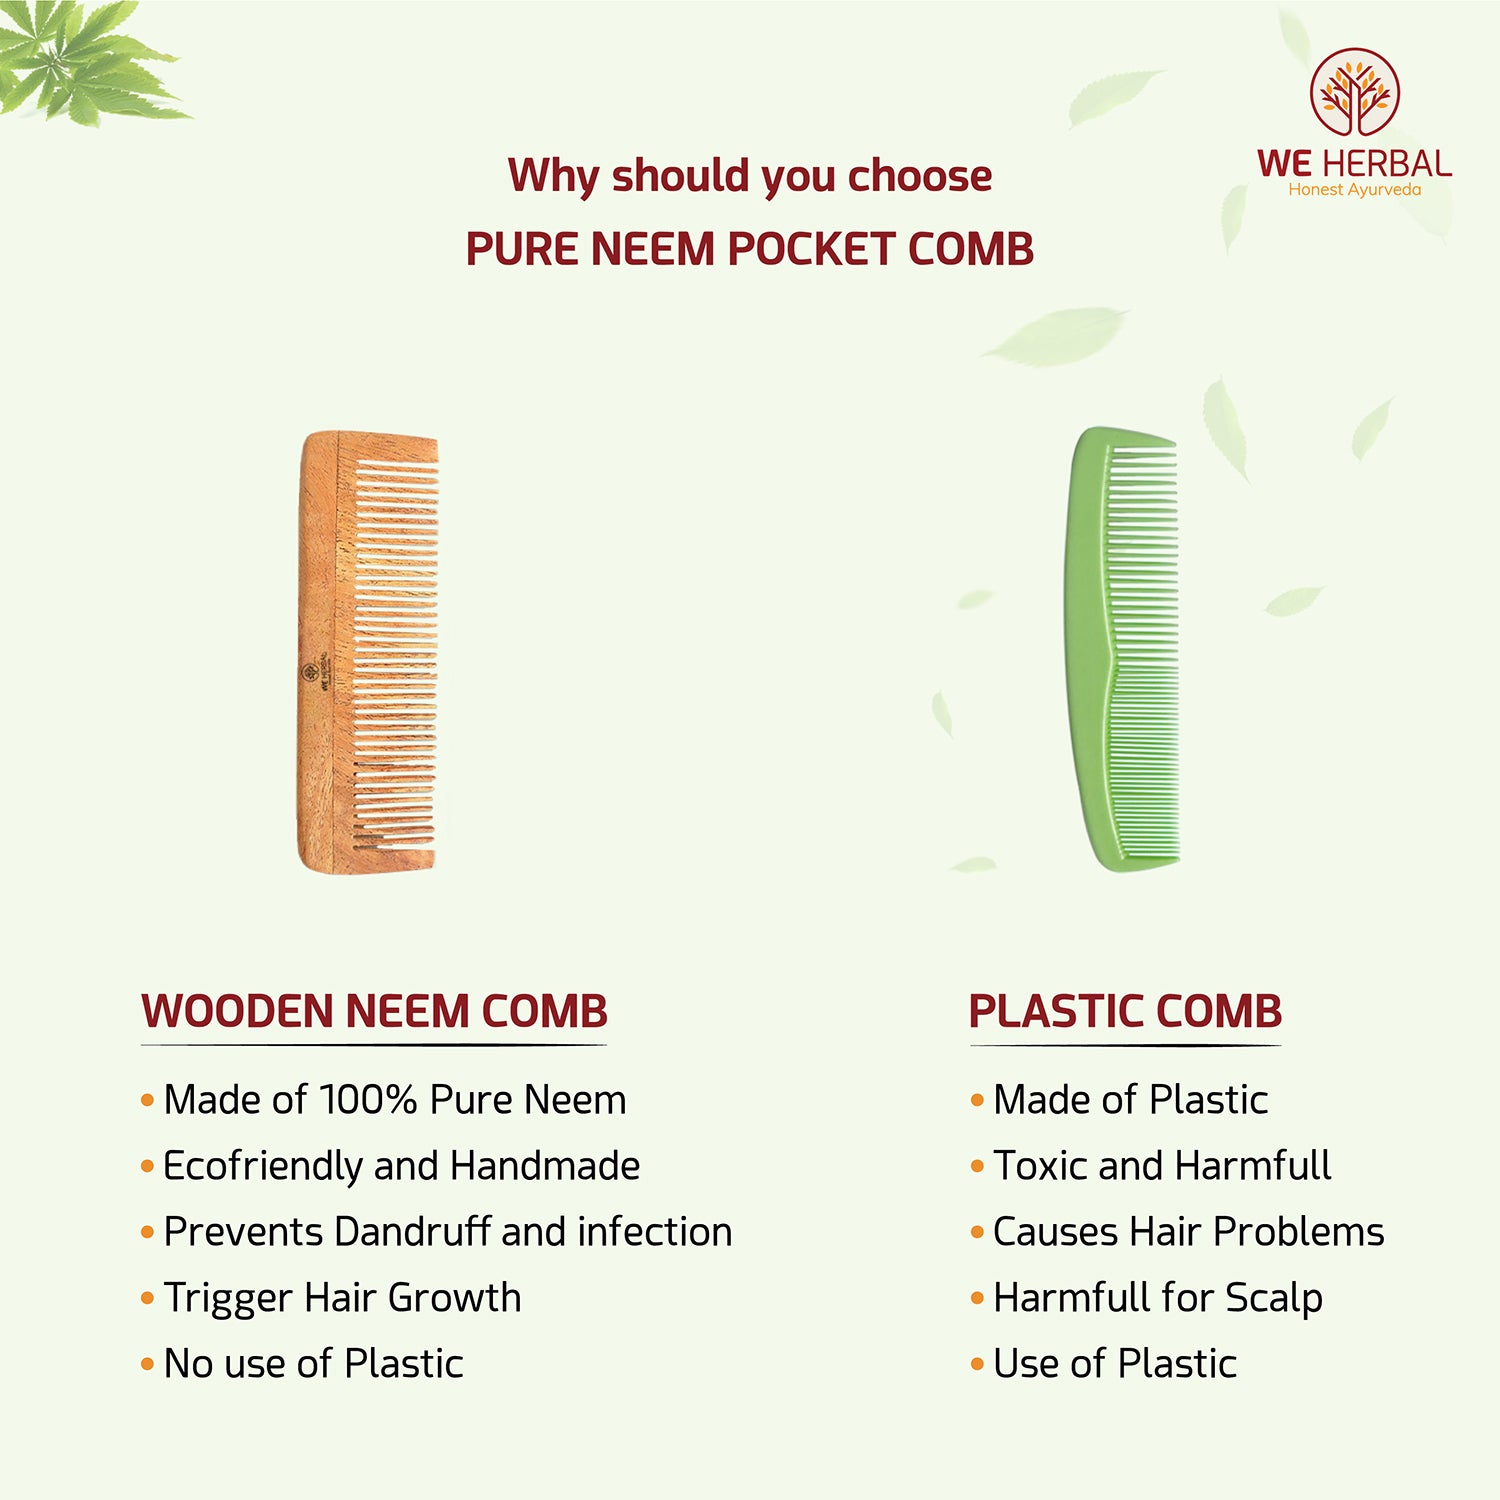 Pure Neem Pocket Comb We Herbal | Back to the Nature